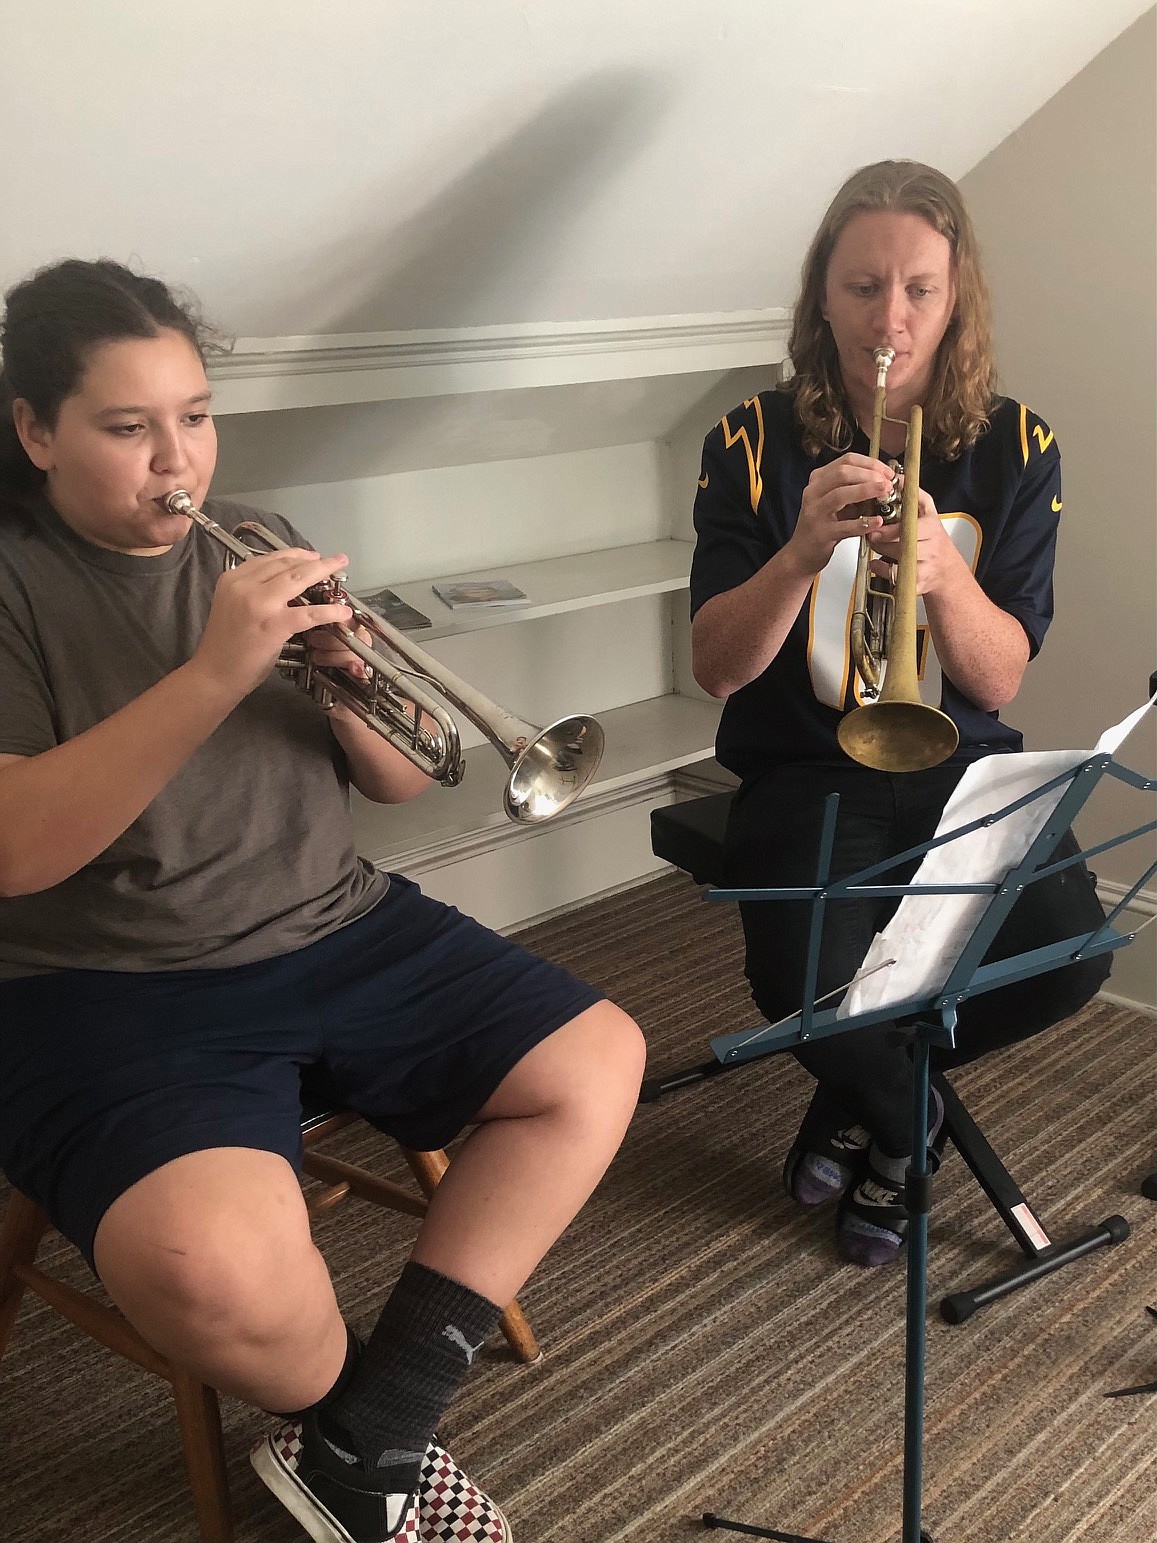 Trumpet student Felix Deady, left, works with instructor Caden Davis at the Music Conservatory of Coeur d'Alene located in the historic Hamilton House on Tuesday. Photo courtesy of Julienne Dance